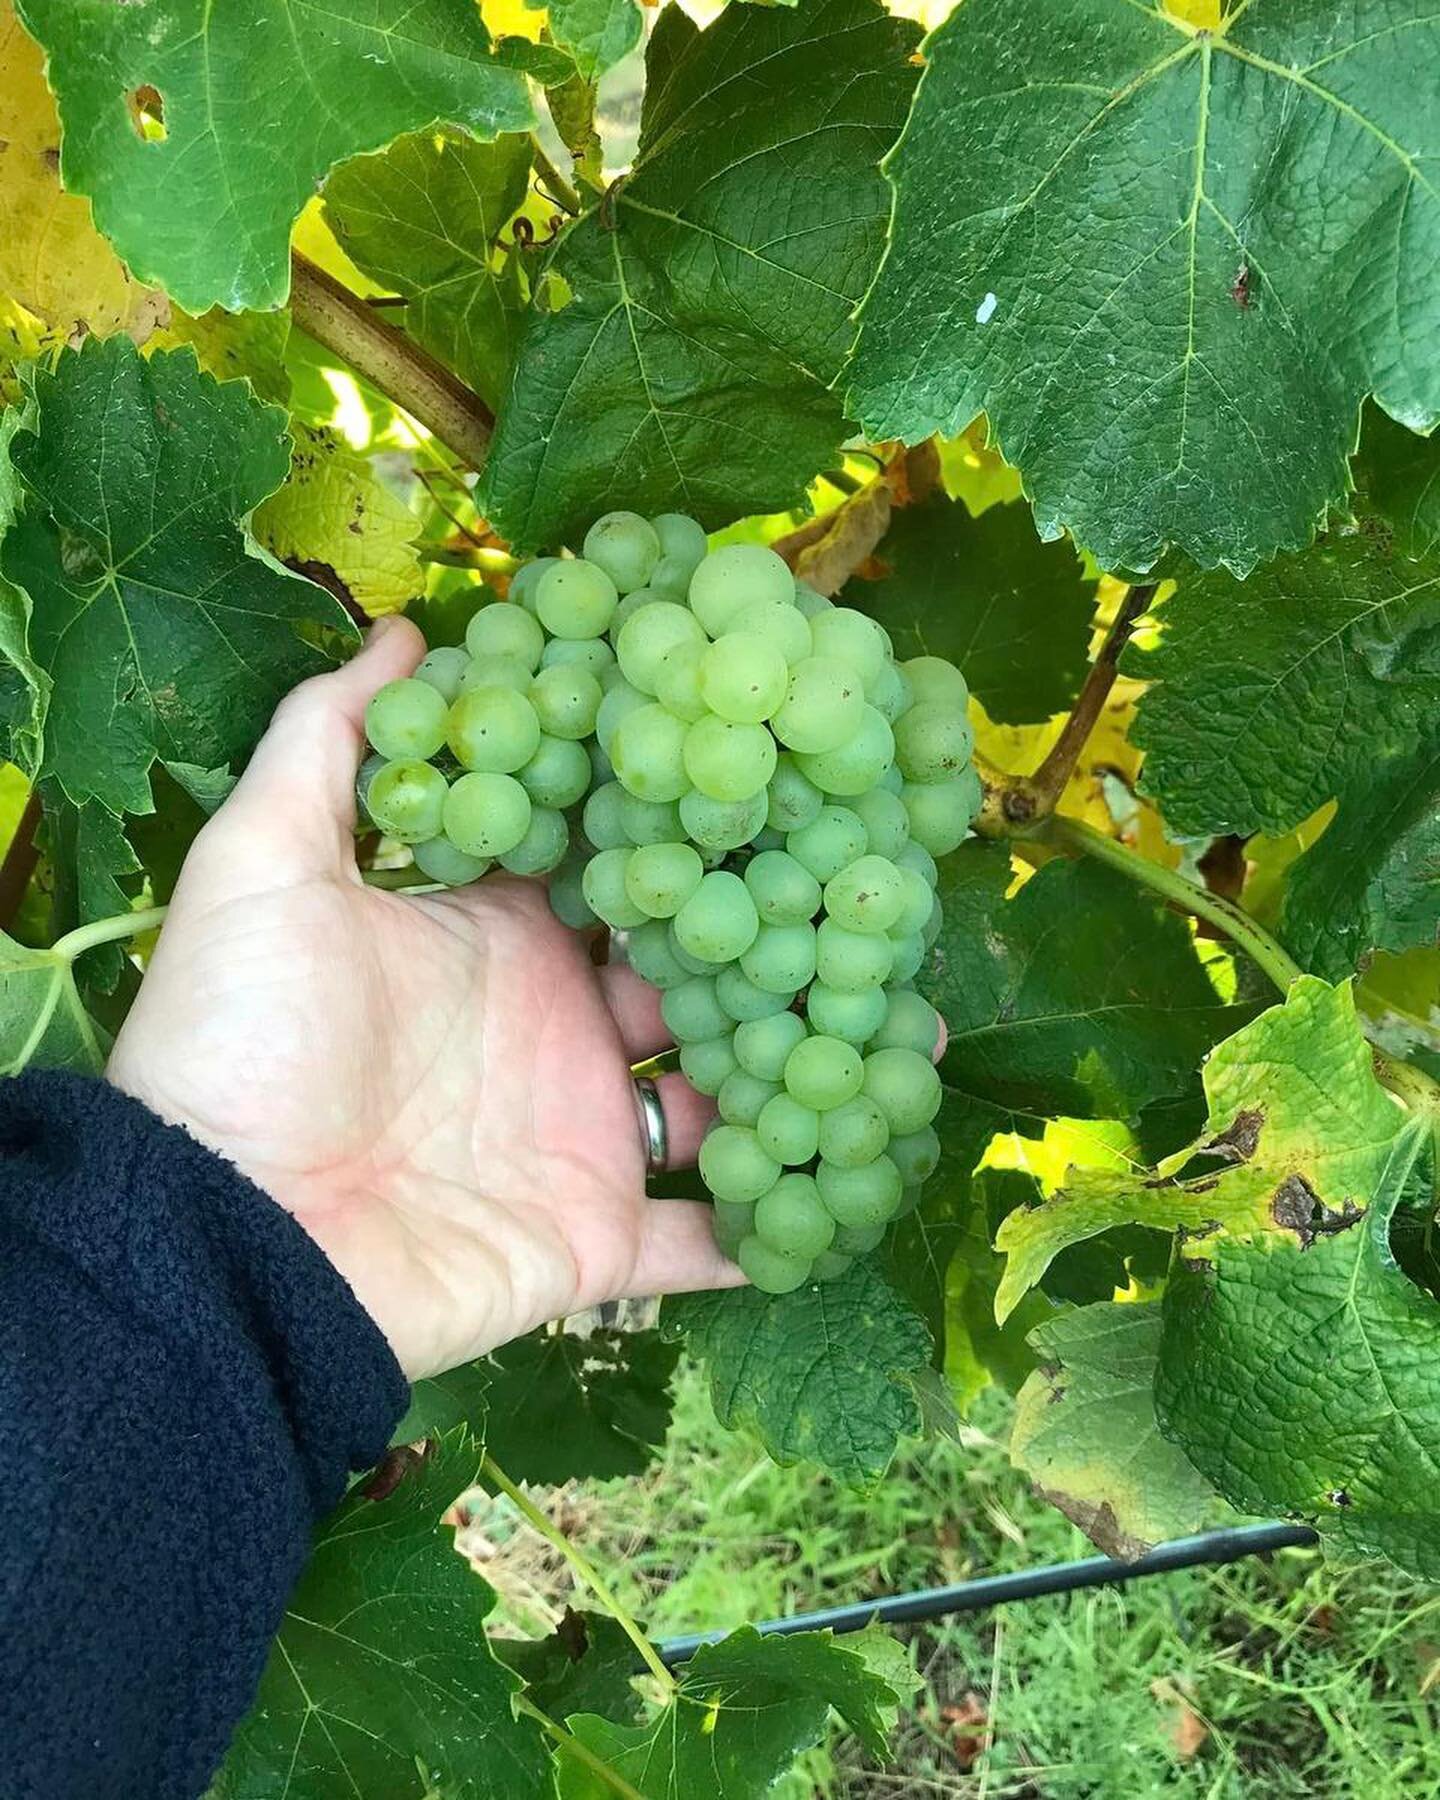 Gorgeous, bountiful bunches in the vines this year 🍷

#visitgeelongbellarine #winery #vineyard #grapes #harvest